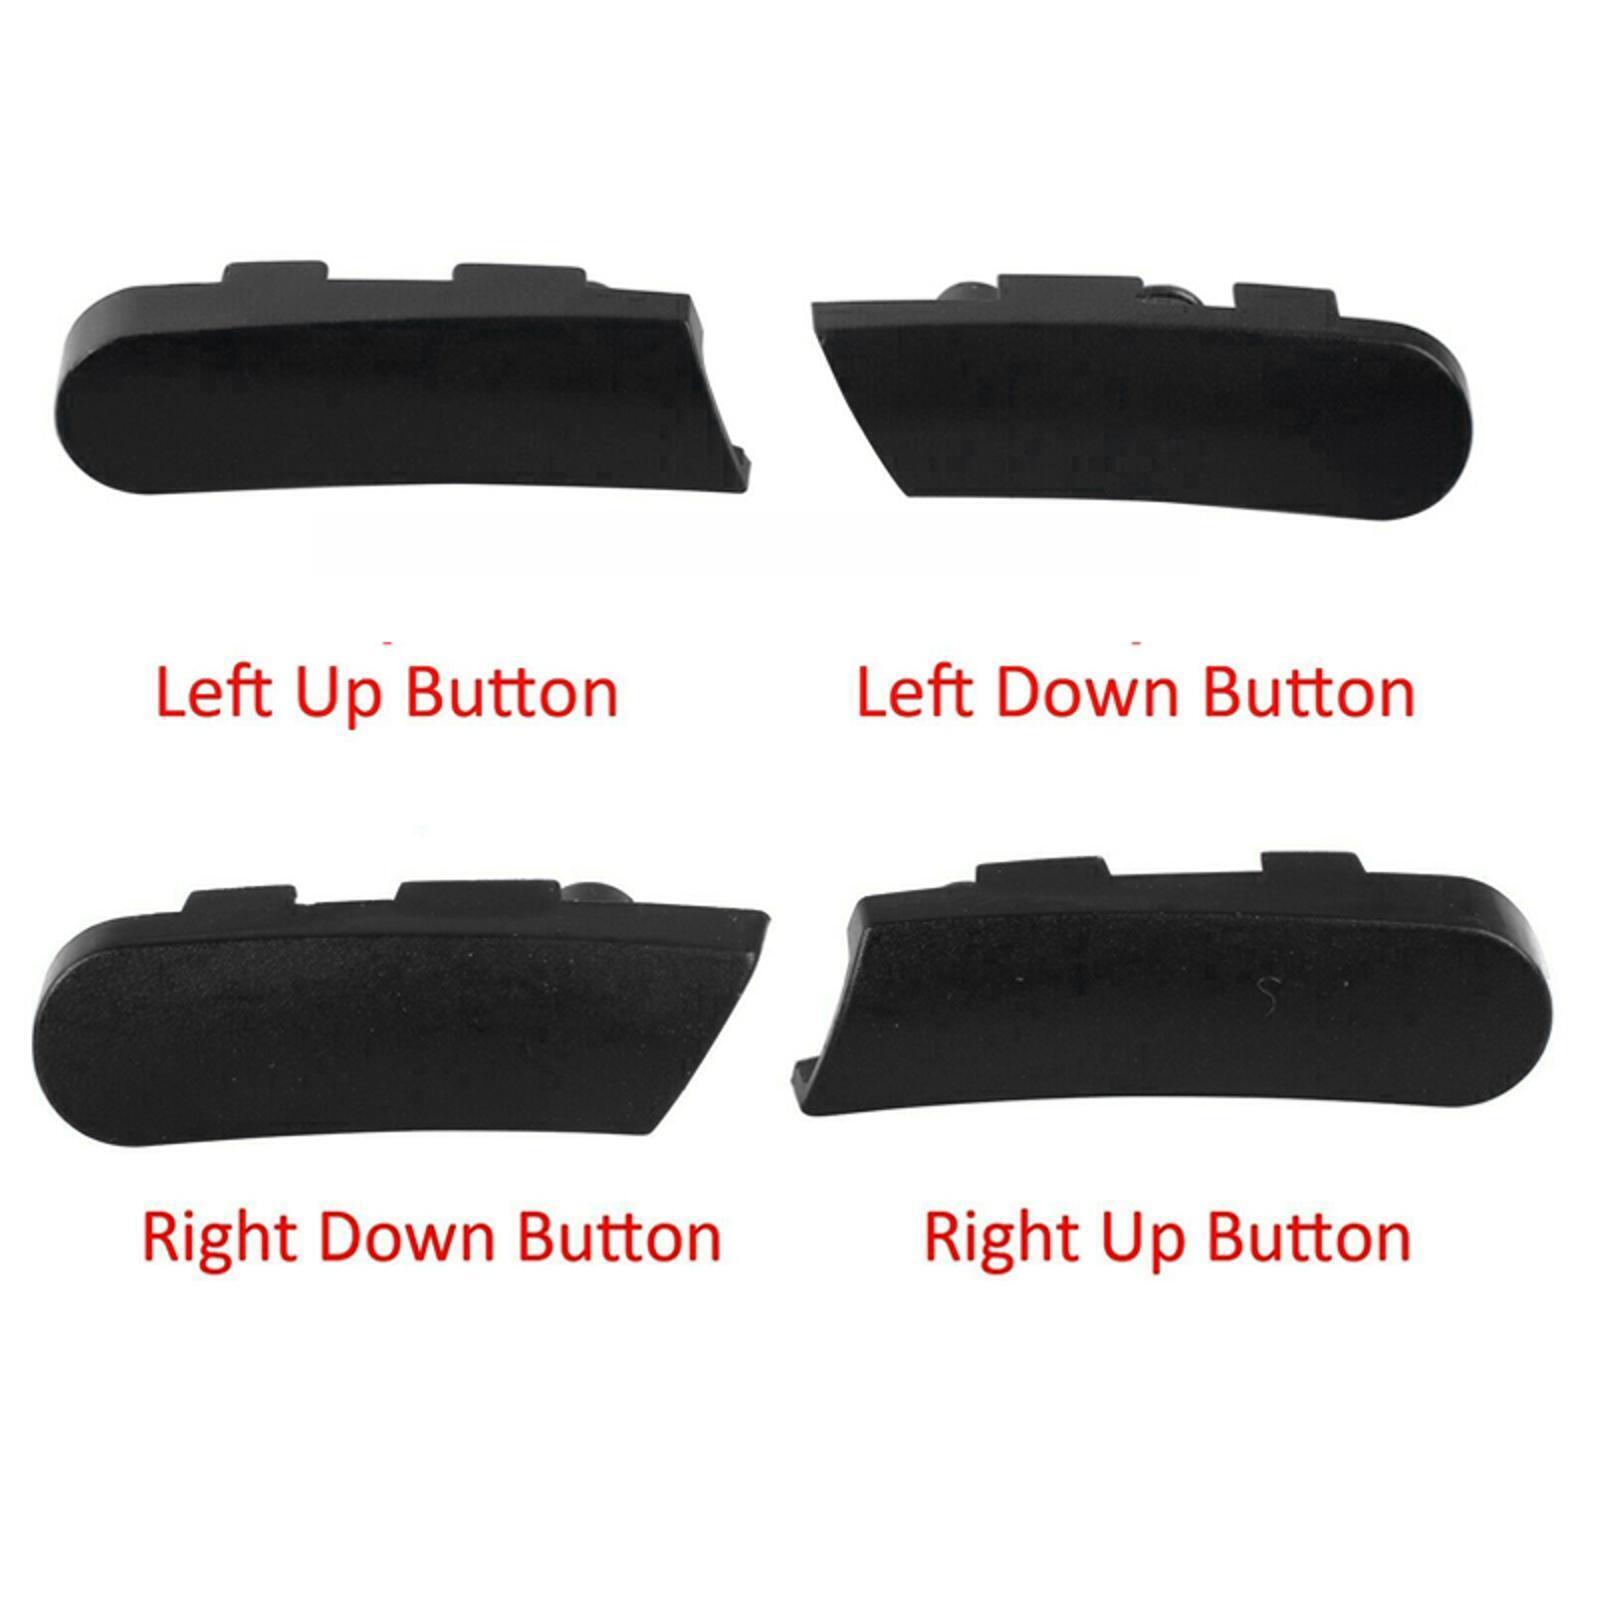 Replacement Left/Right/Up/Down Mouse Side Button Key for Logitech G Pro Wireless